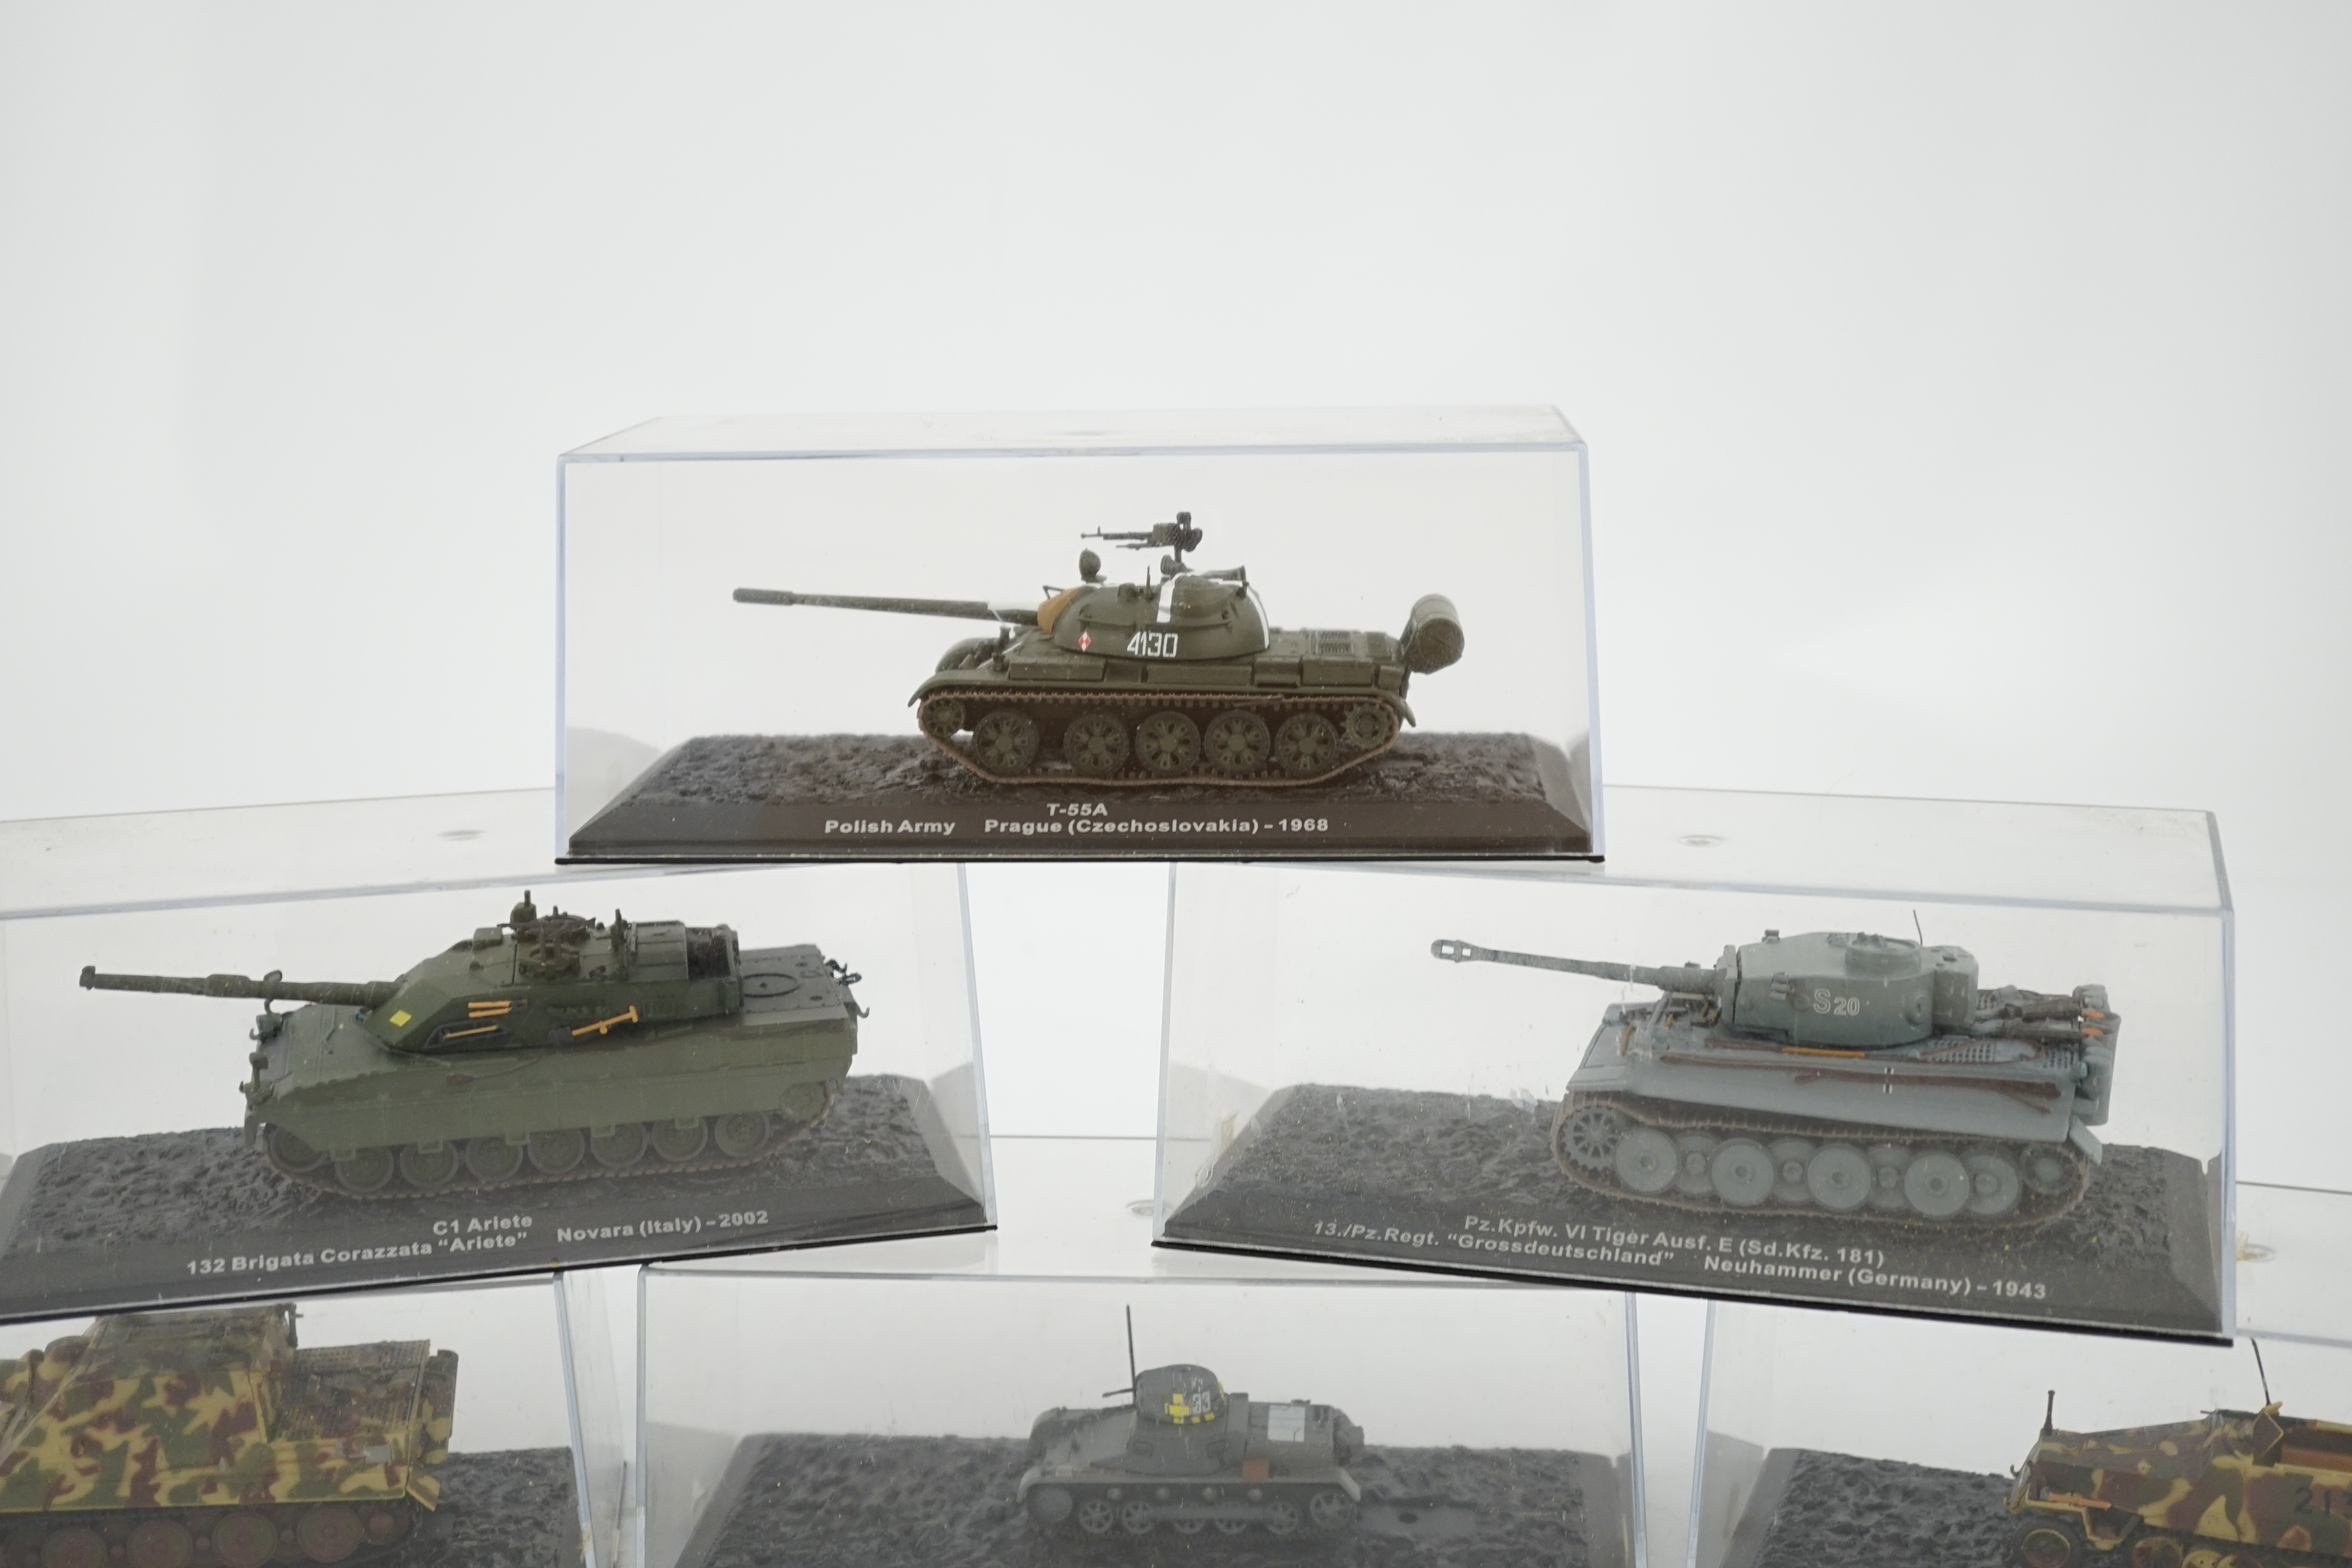 Sixty-eight magazine issue military vehicles in plastic display cases, including; tanks, armoured cars, personnel transporters, etc.